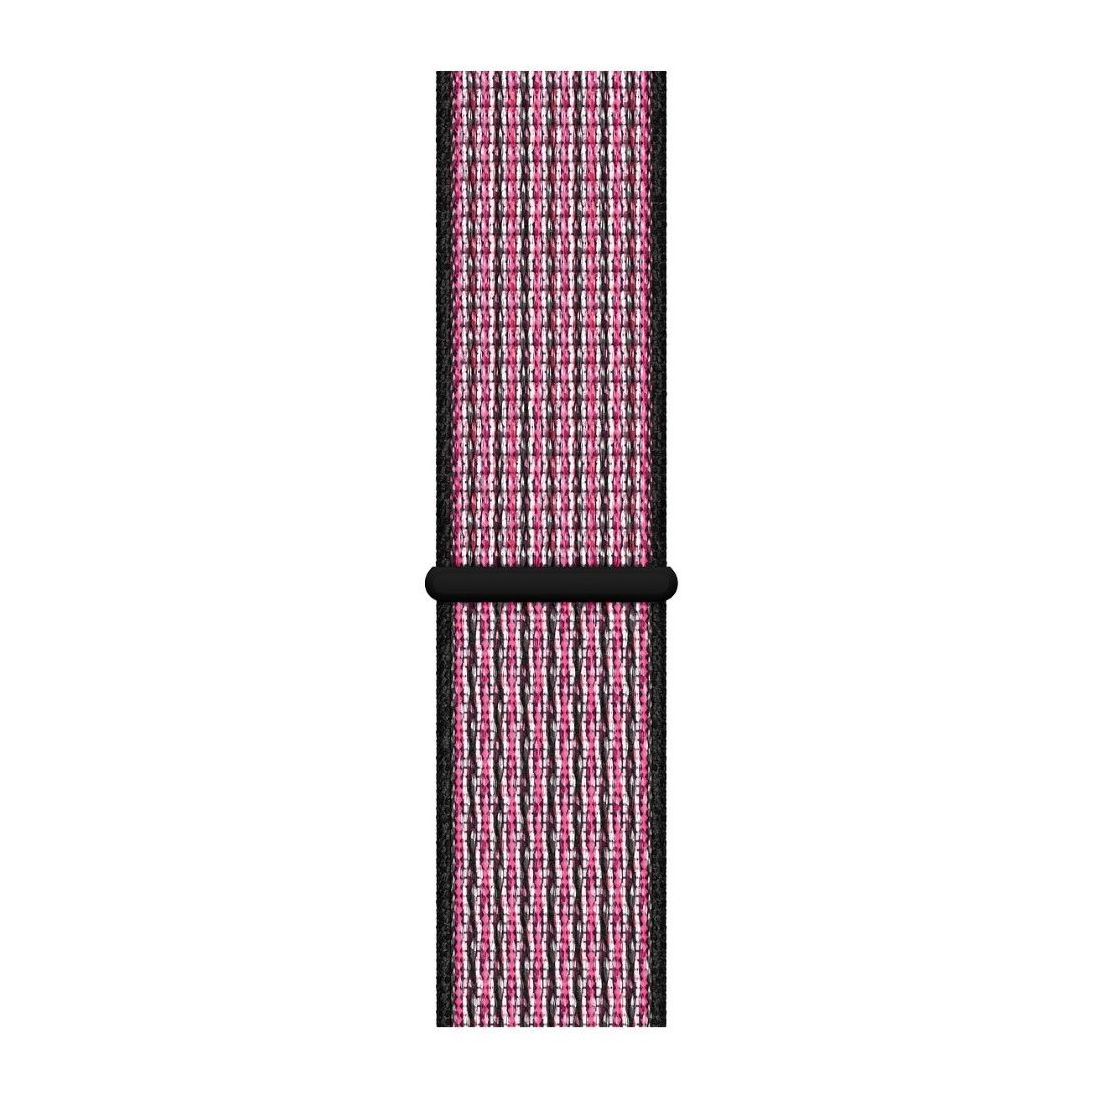 Apple 44mm Pink Blast/True Berry Nike Sport Loop for Apple Watch (Compatible with Apple Watch 42/44/45mm)